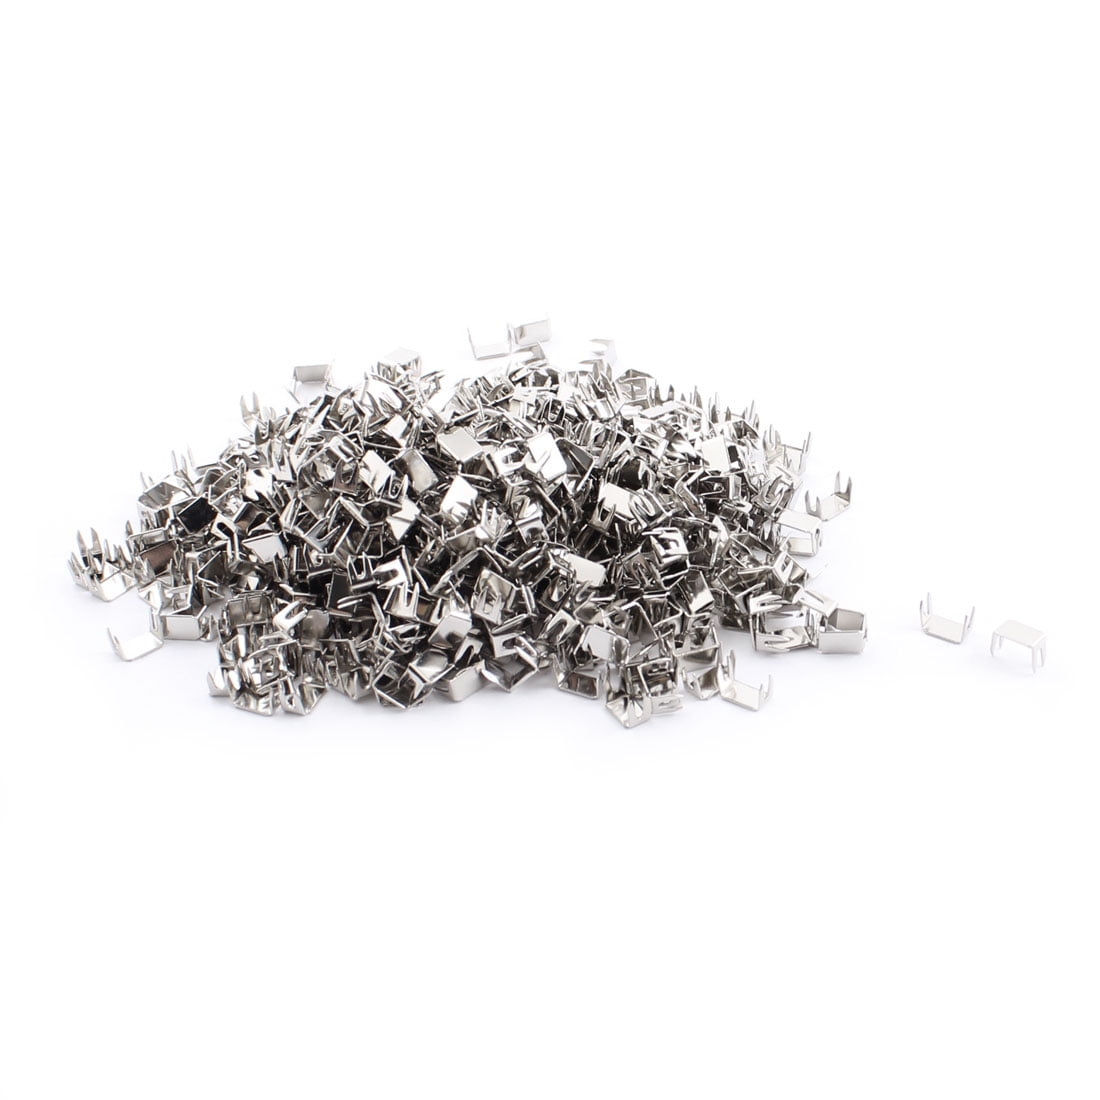 uxcell Zipper Slider Replacement Bottom Stopper Stop Kit Silver Tone 500 Pcs